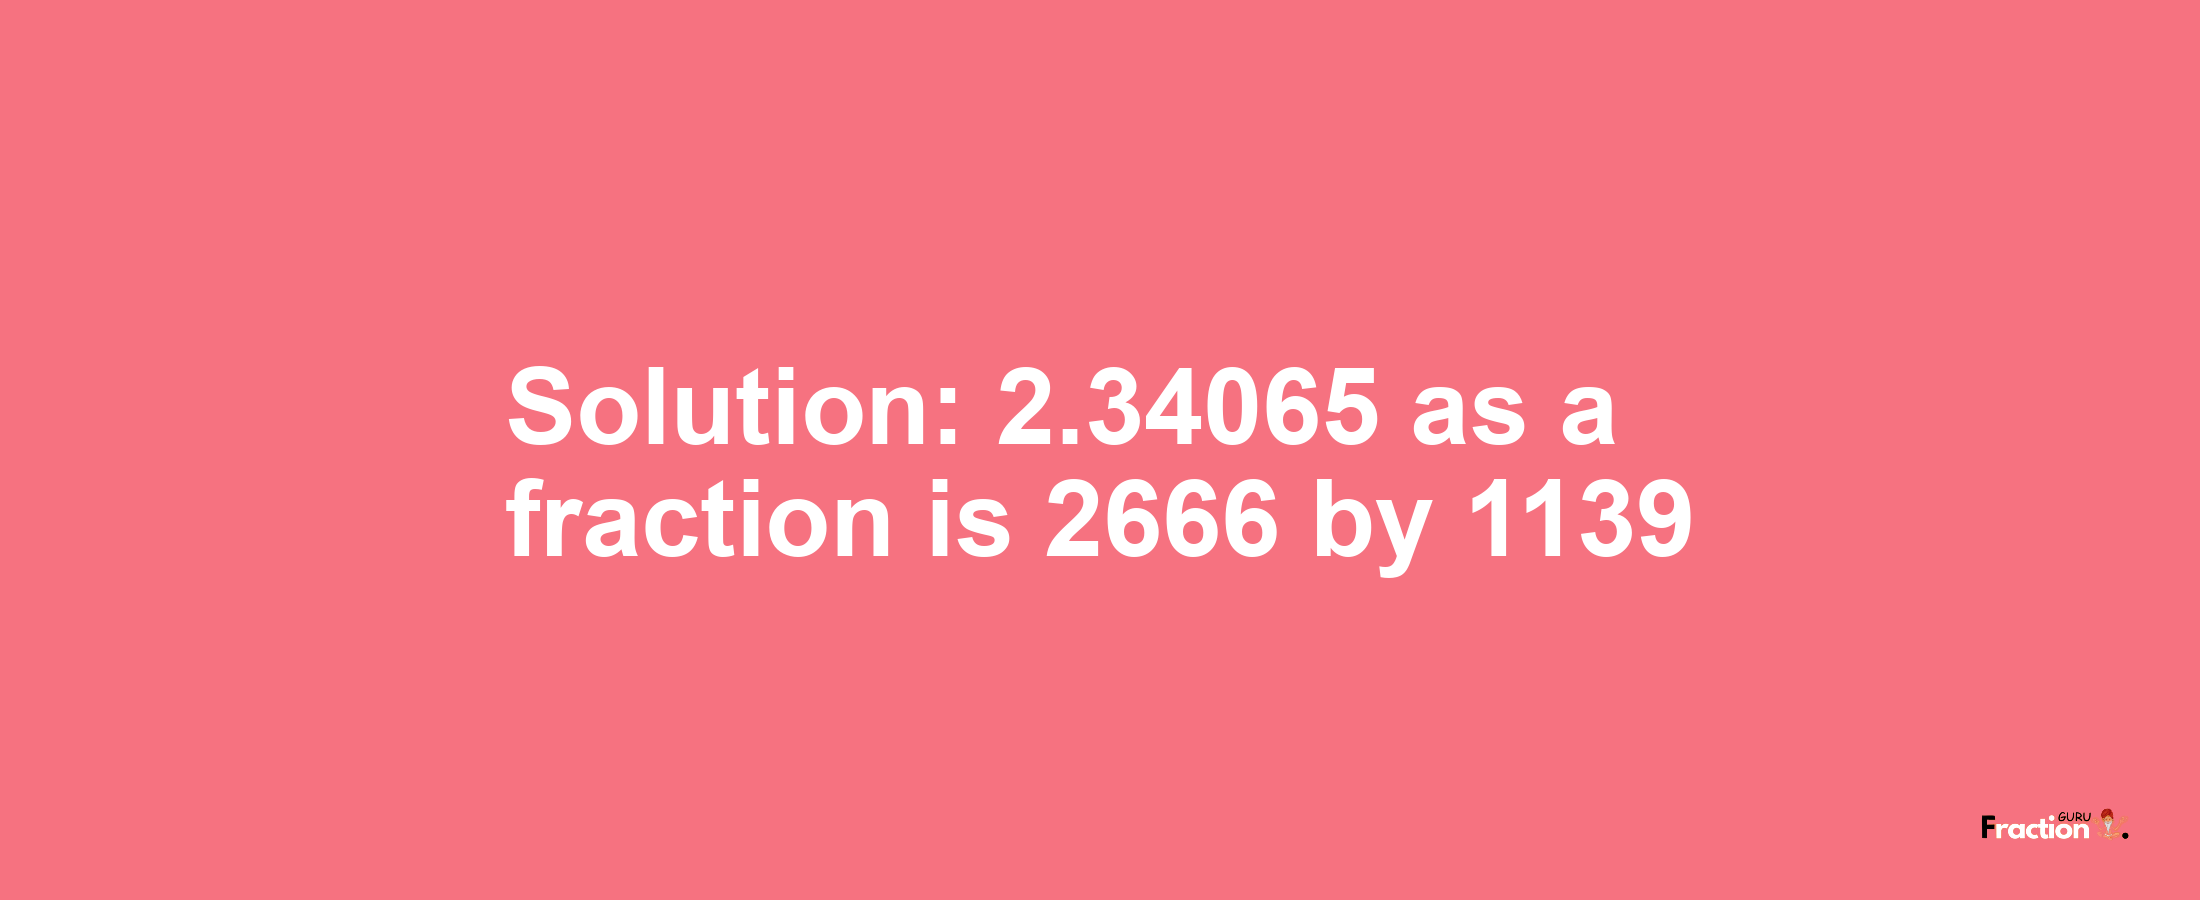 Solution:2.34065 as a fraction is 2666/1139